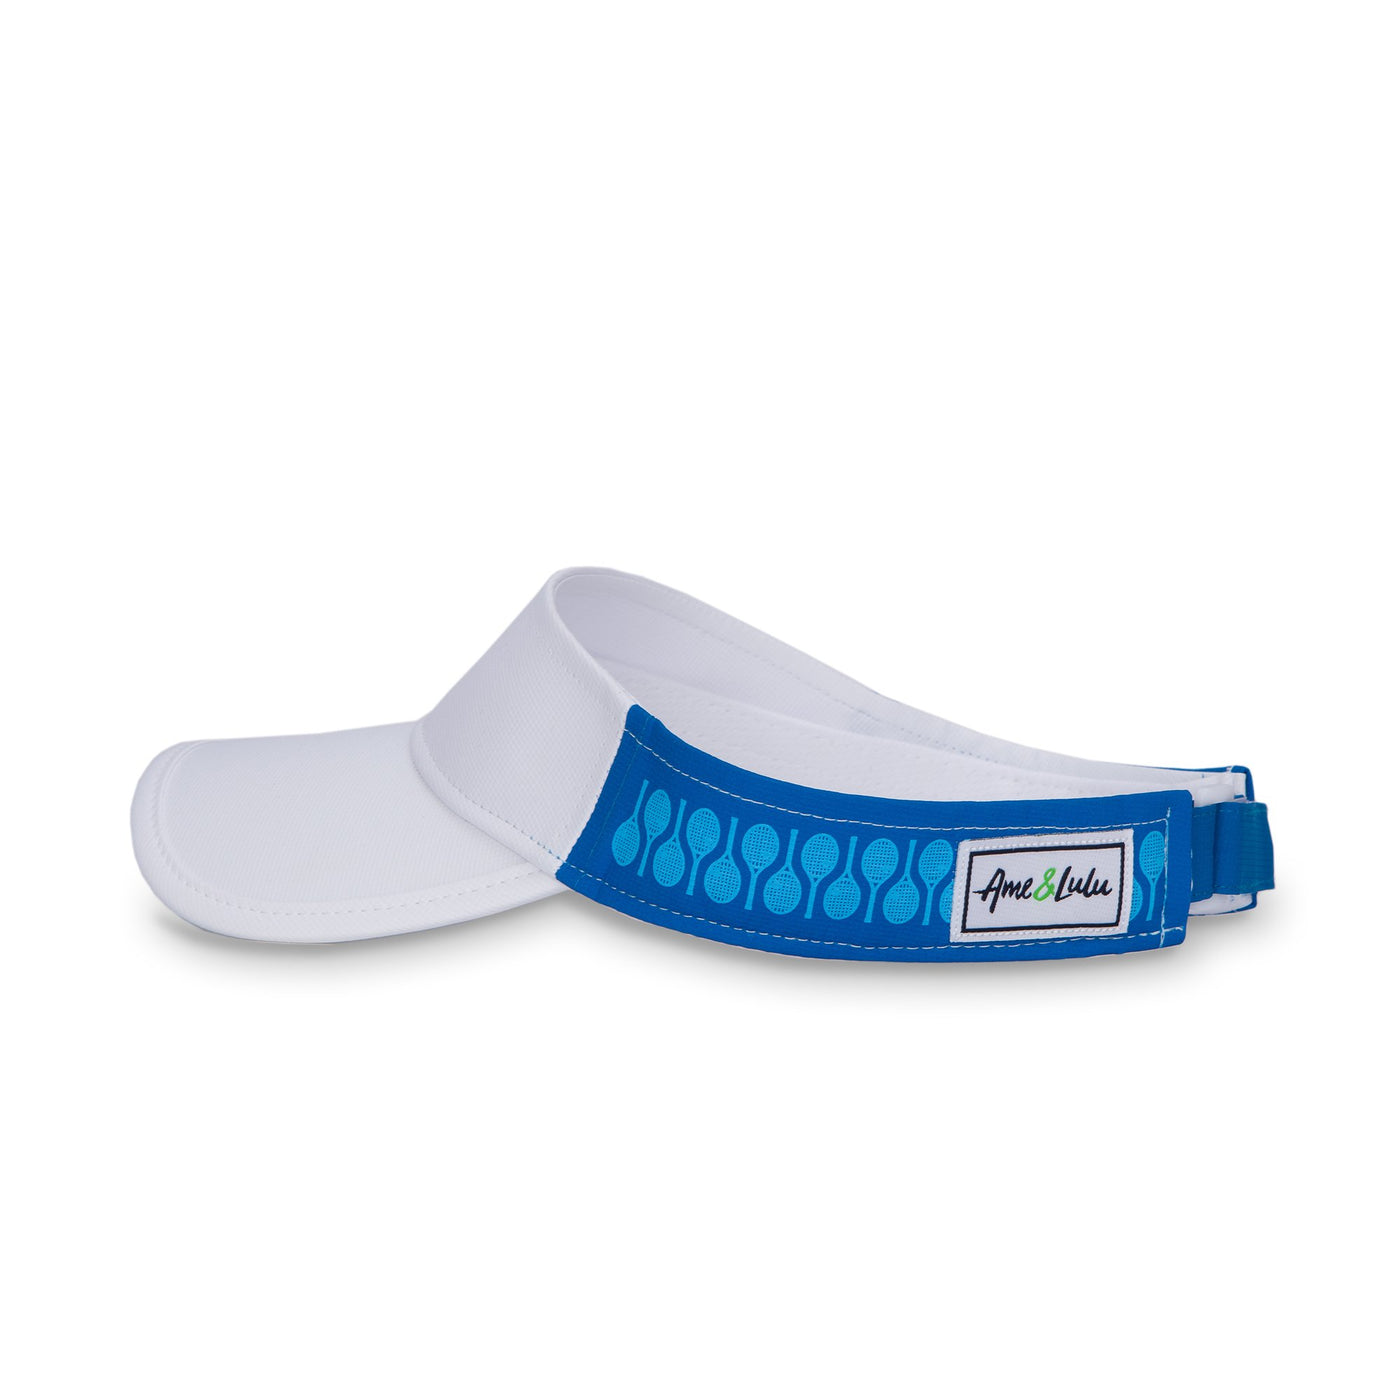 Side view of Blue tonal Racquets Head in the game visor. Front of visor is white and the sides are dark blue with light blue racquets printed on.